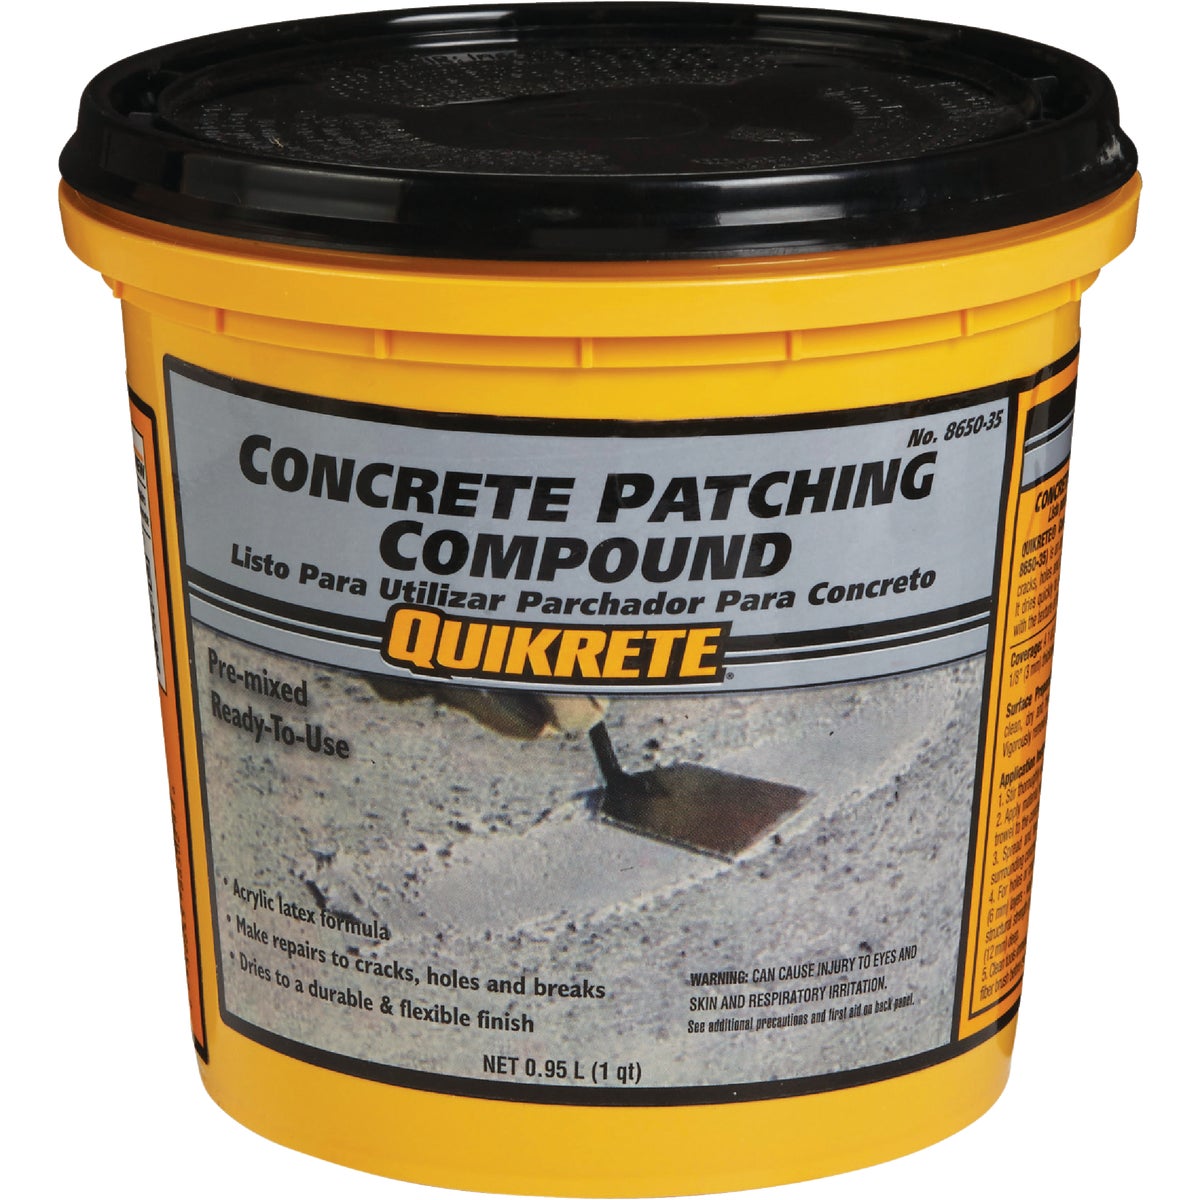 Item 260047, Concrete patching compound is ready-to-use trowel applied textured acrylic 